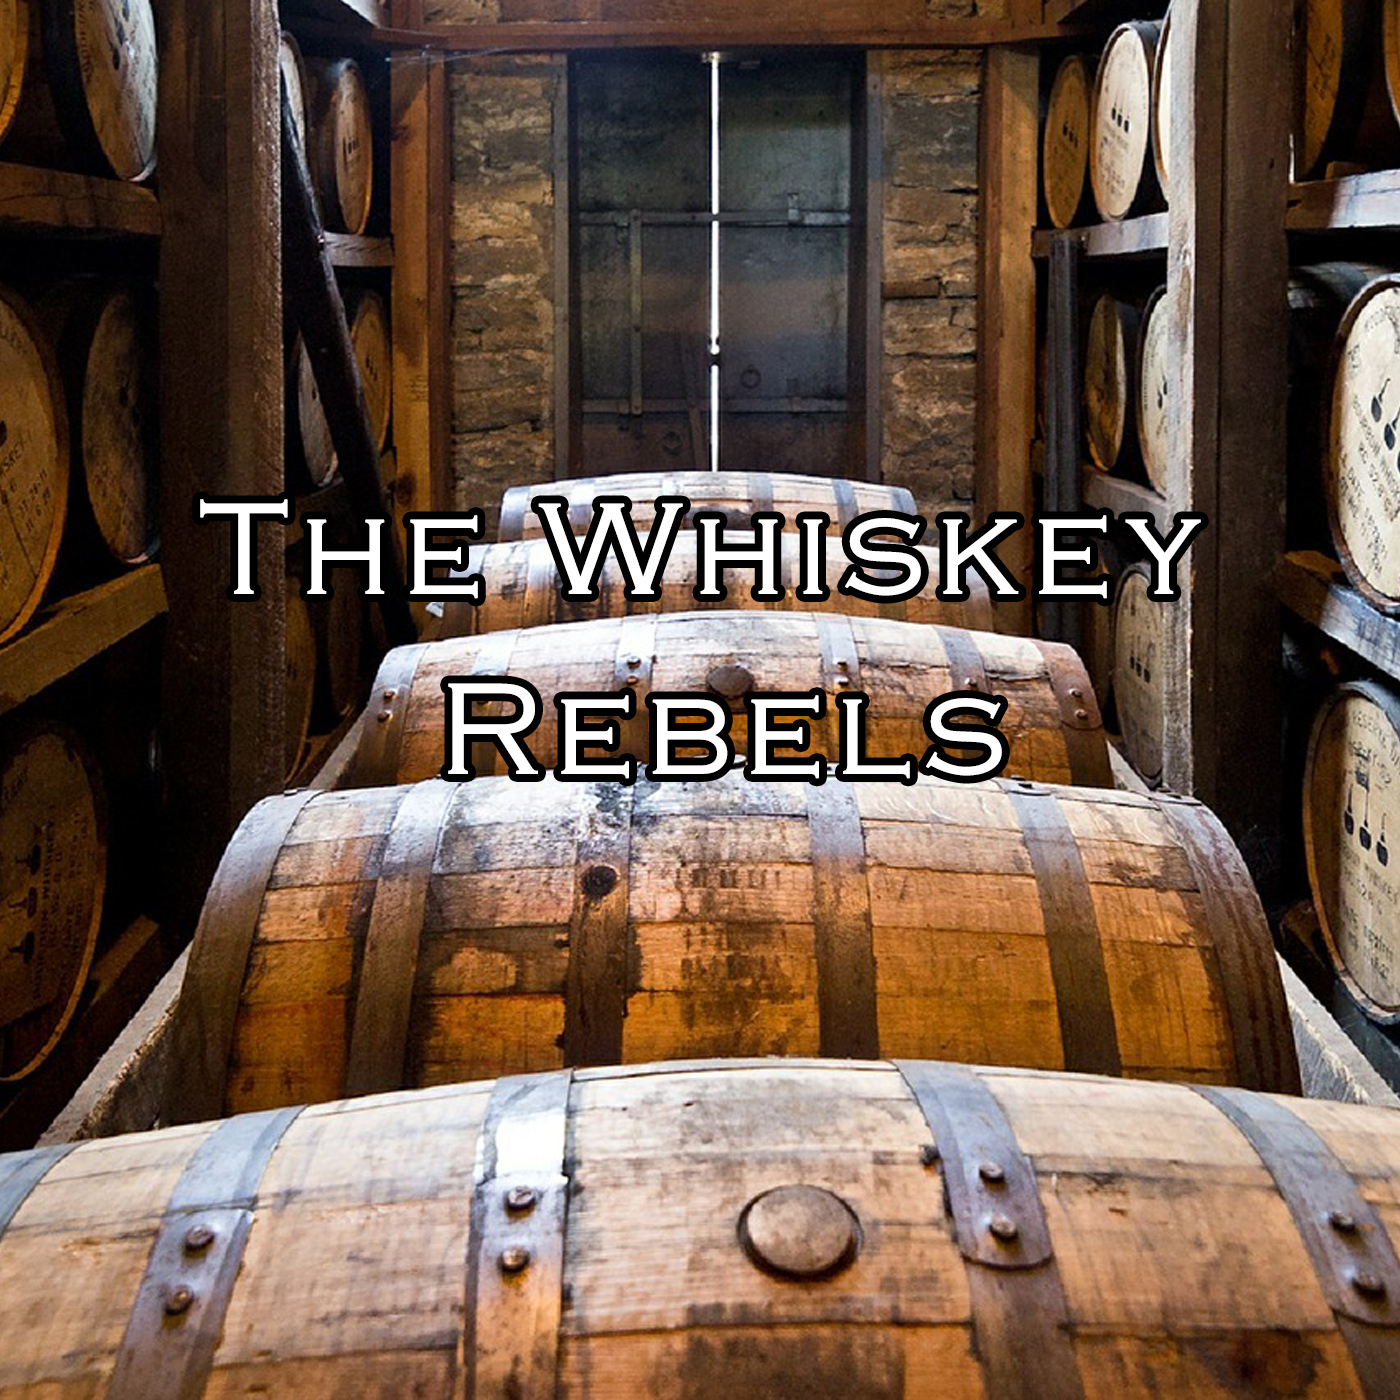 #5: A Brief History of Whiskey